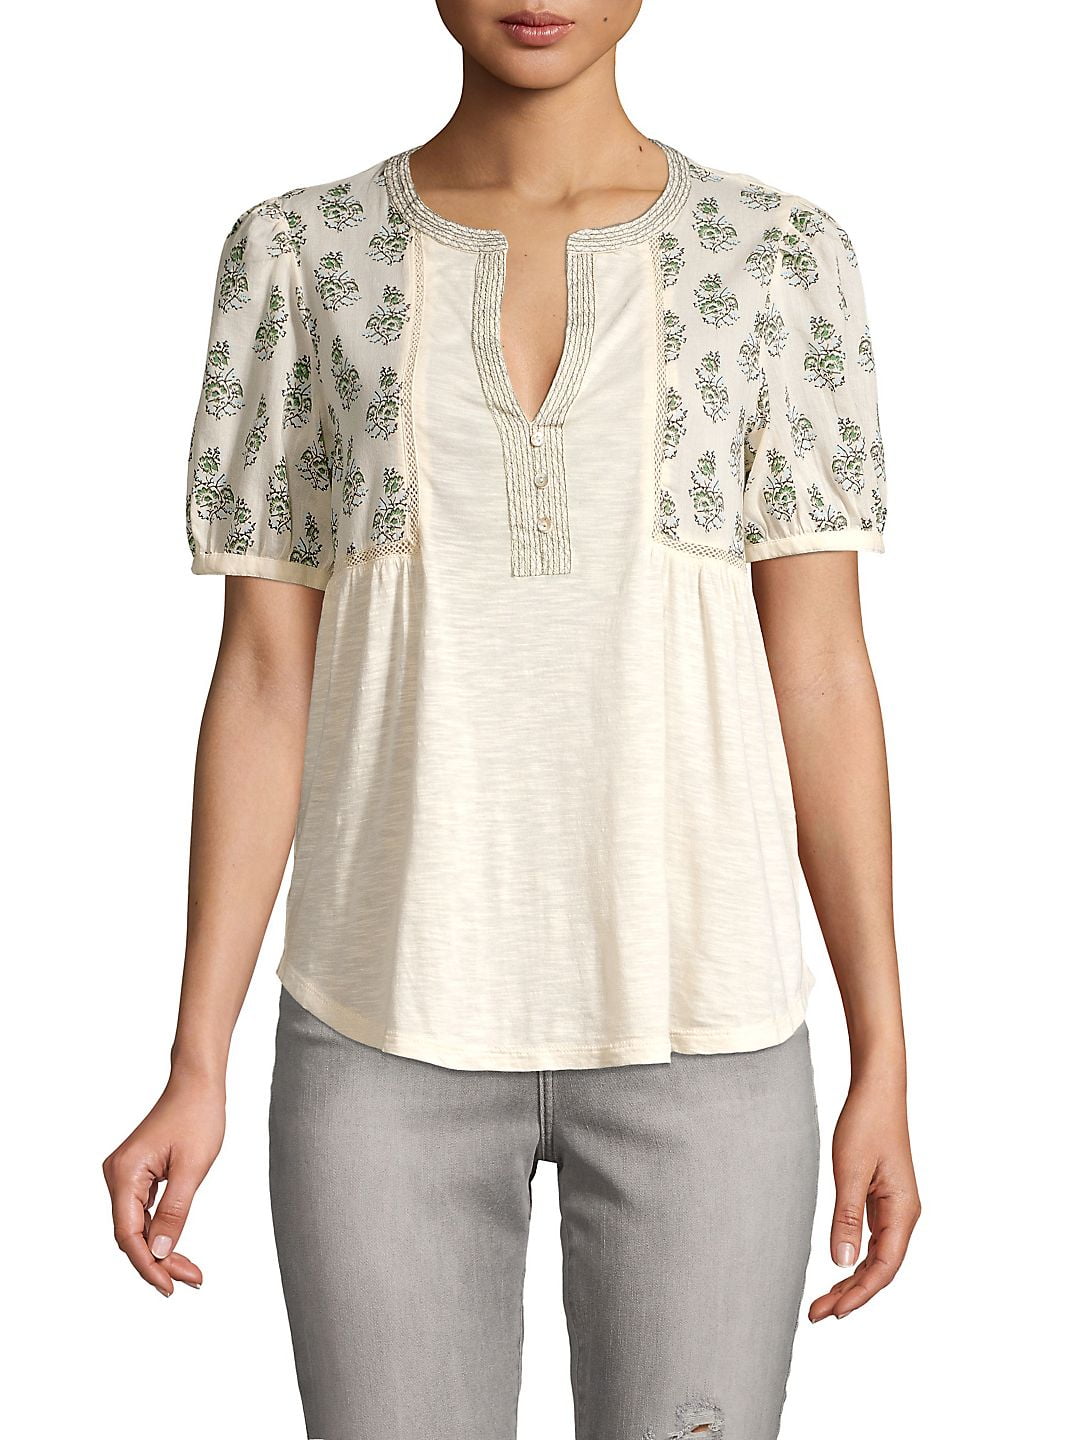 Lucky Brand Women’s Cream Floral Print Short Sleeve Blouse Size L MSRP $49.50